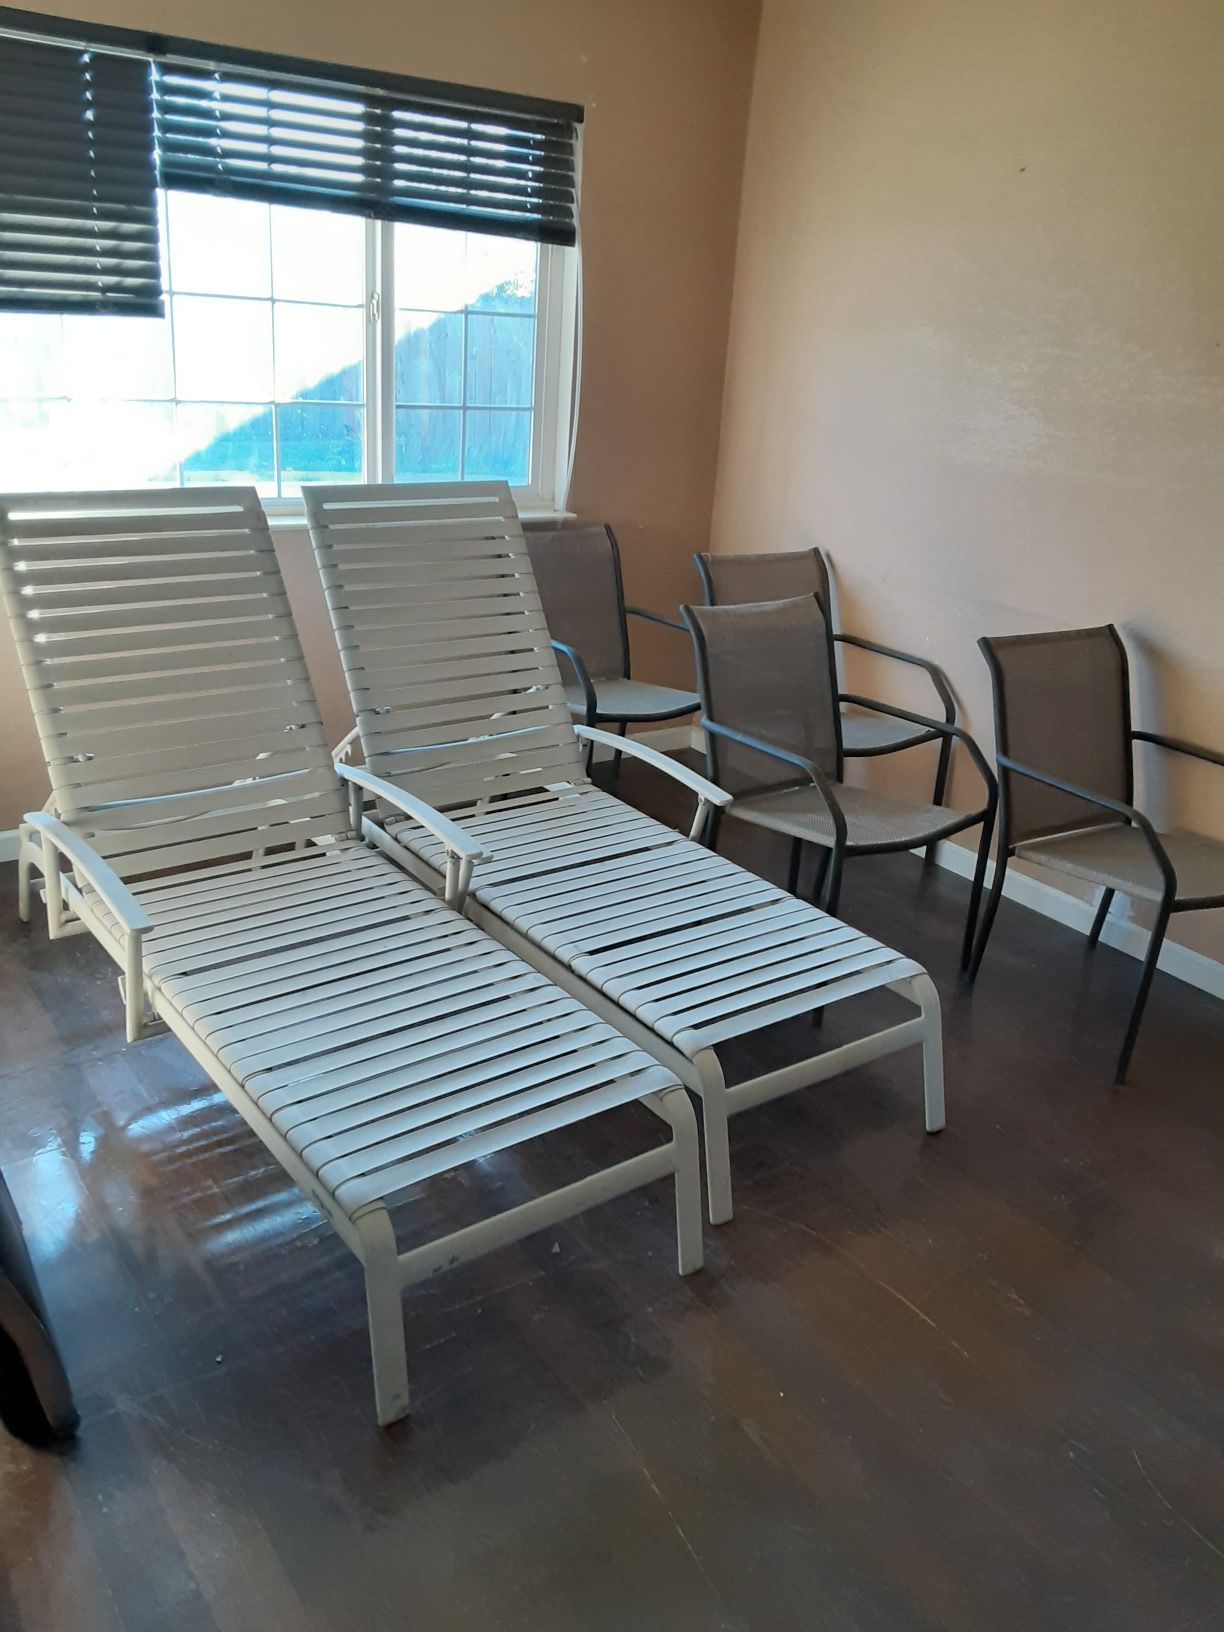 2 outdoor lounge chairs and 4 outdoor chairs